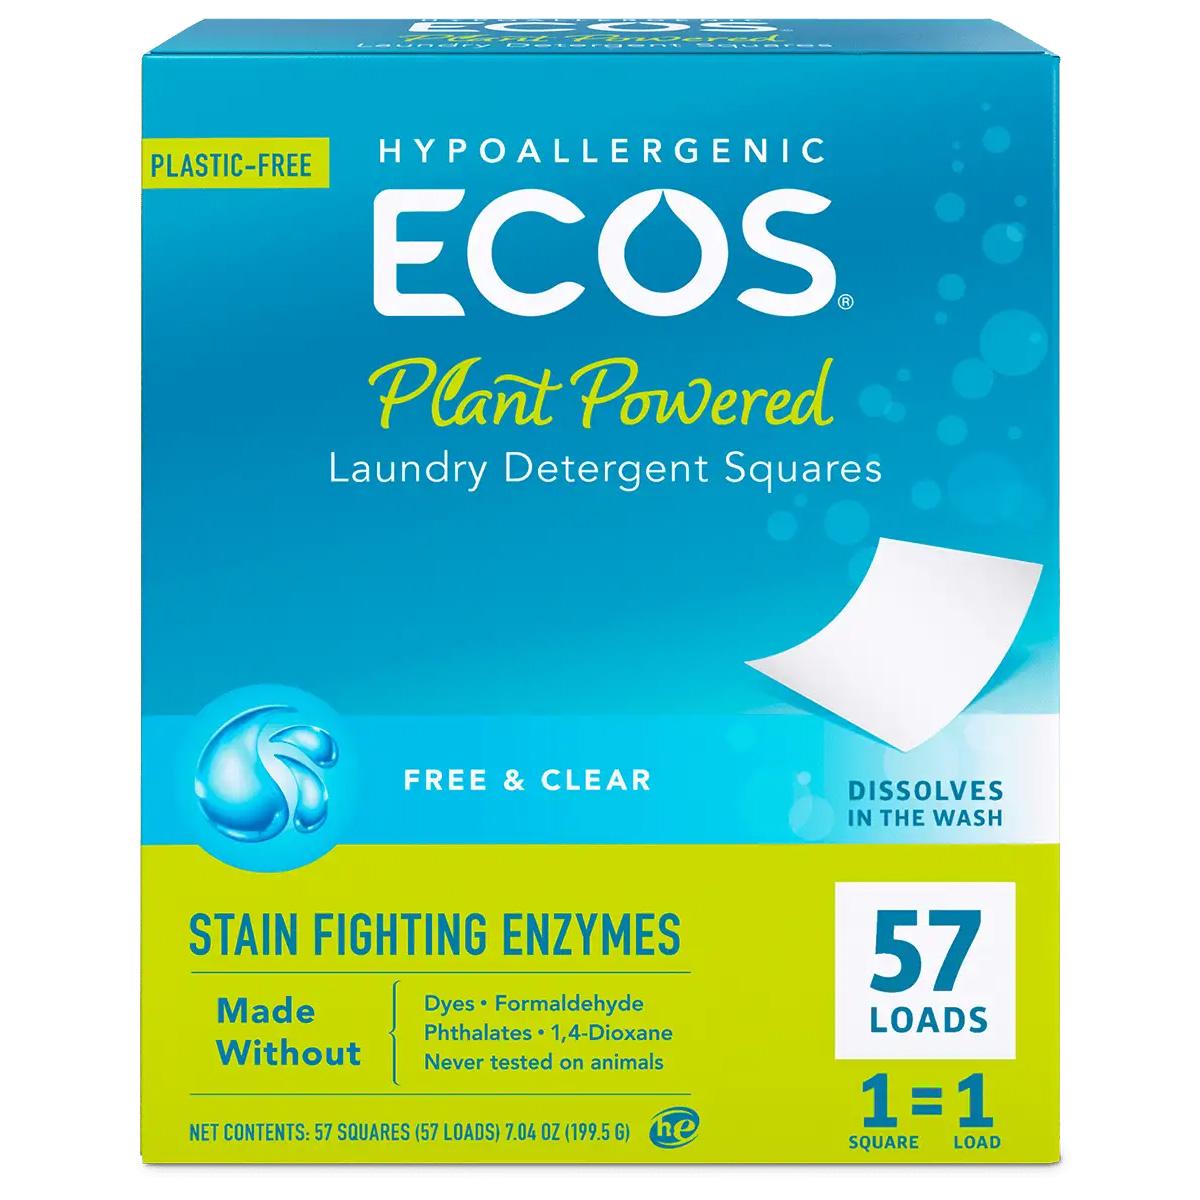 ECOS Liquidless Laundry Detergent Sheet for Free